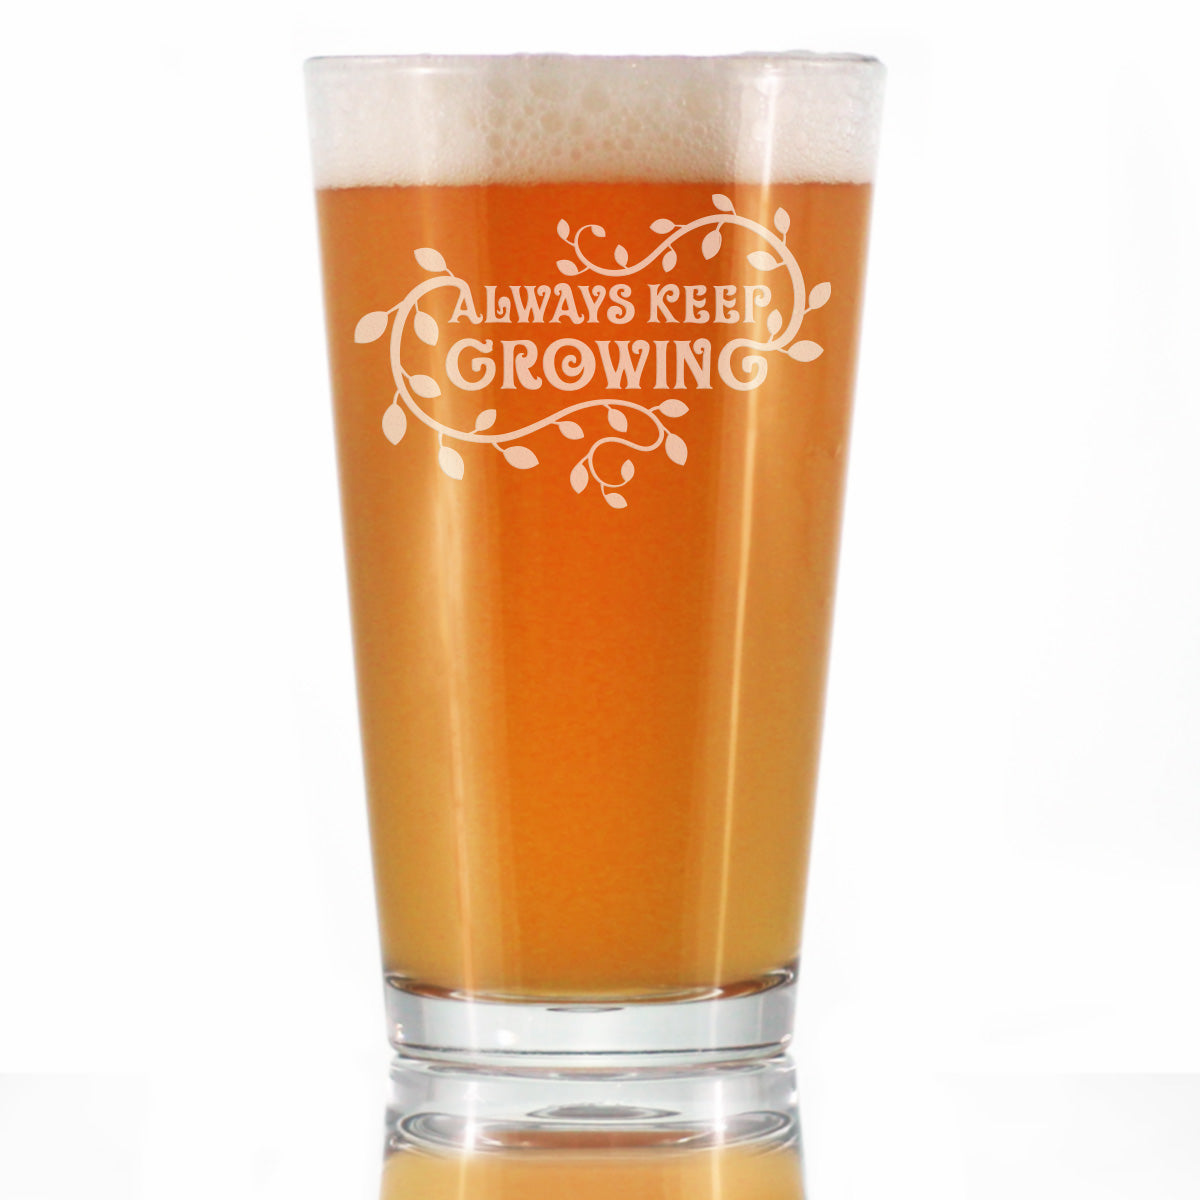 Keep Growing - Pint Glass for Beer - Gardening Themed Gifts and Decor for Gardeners - 16 oz Glass